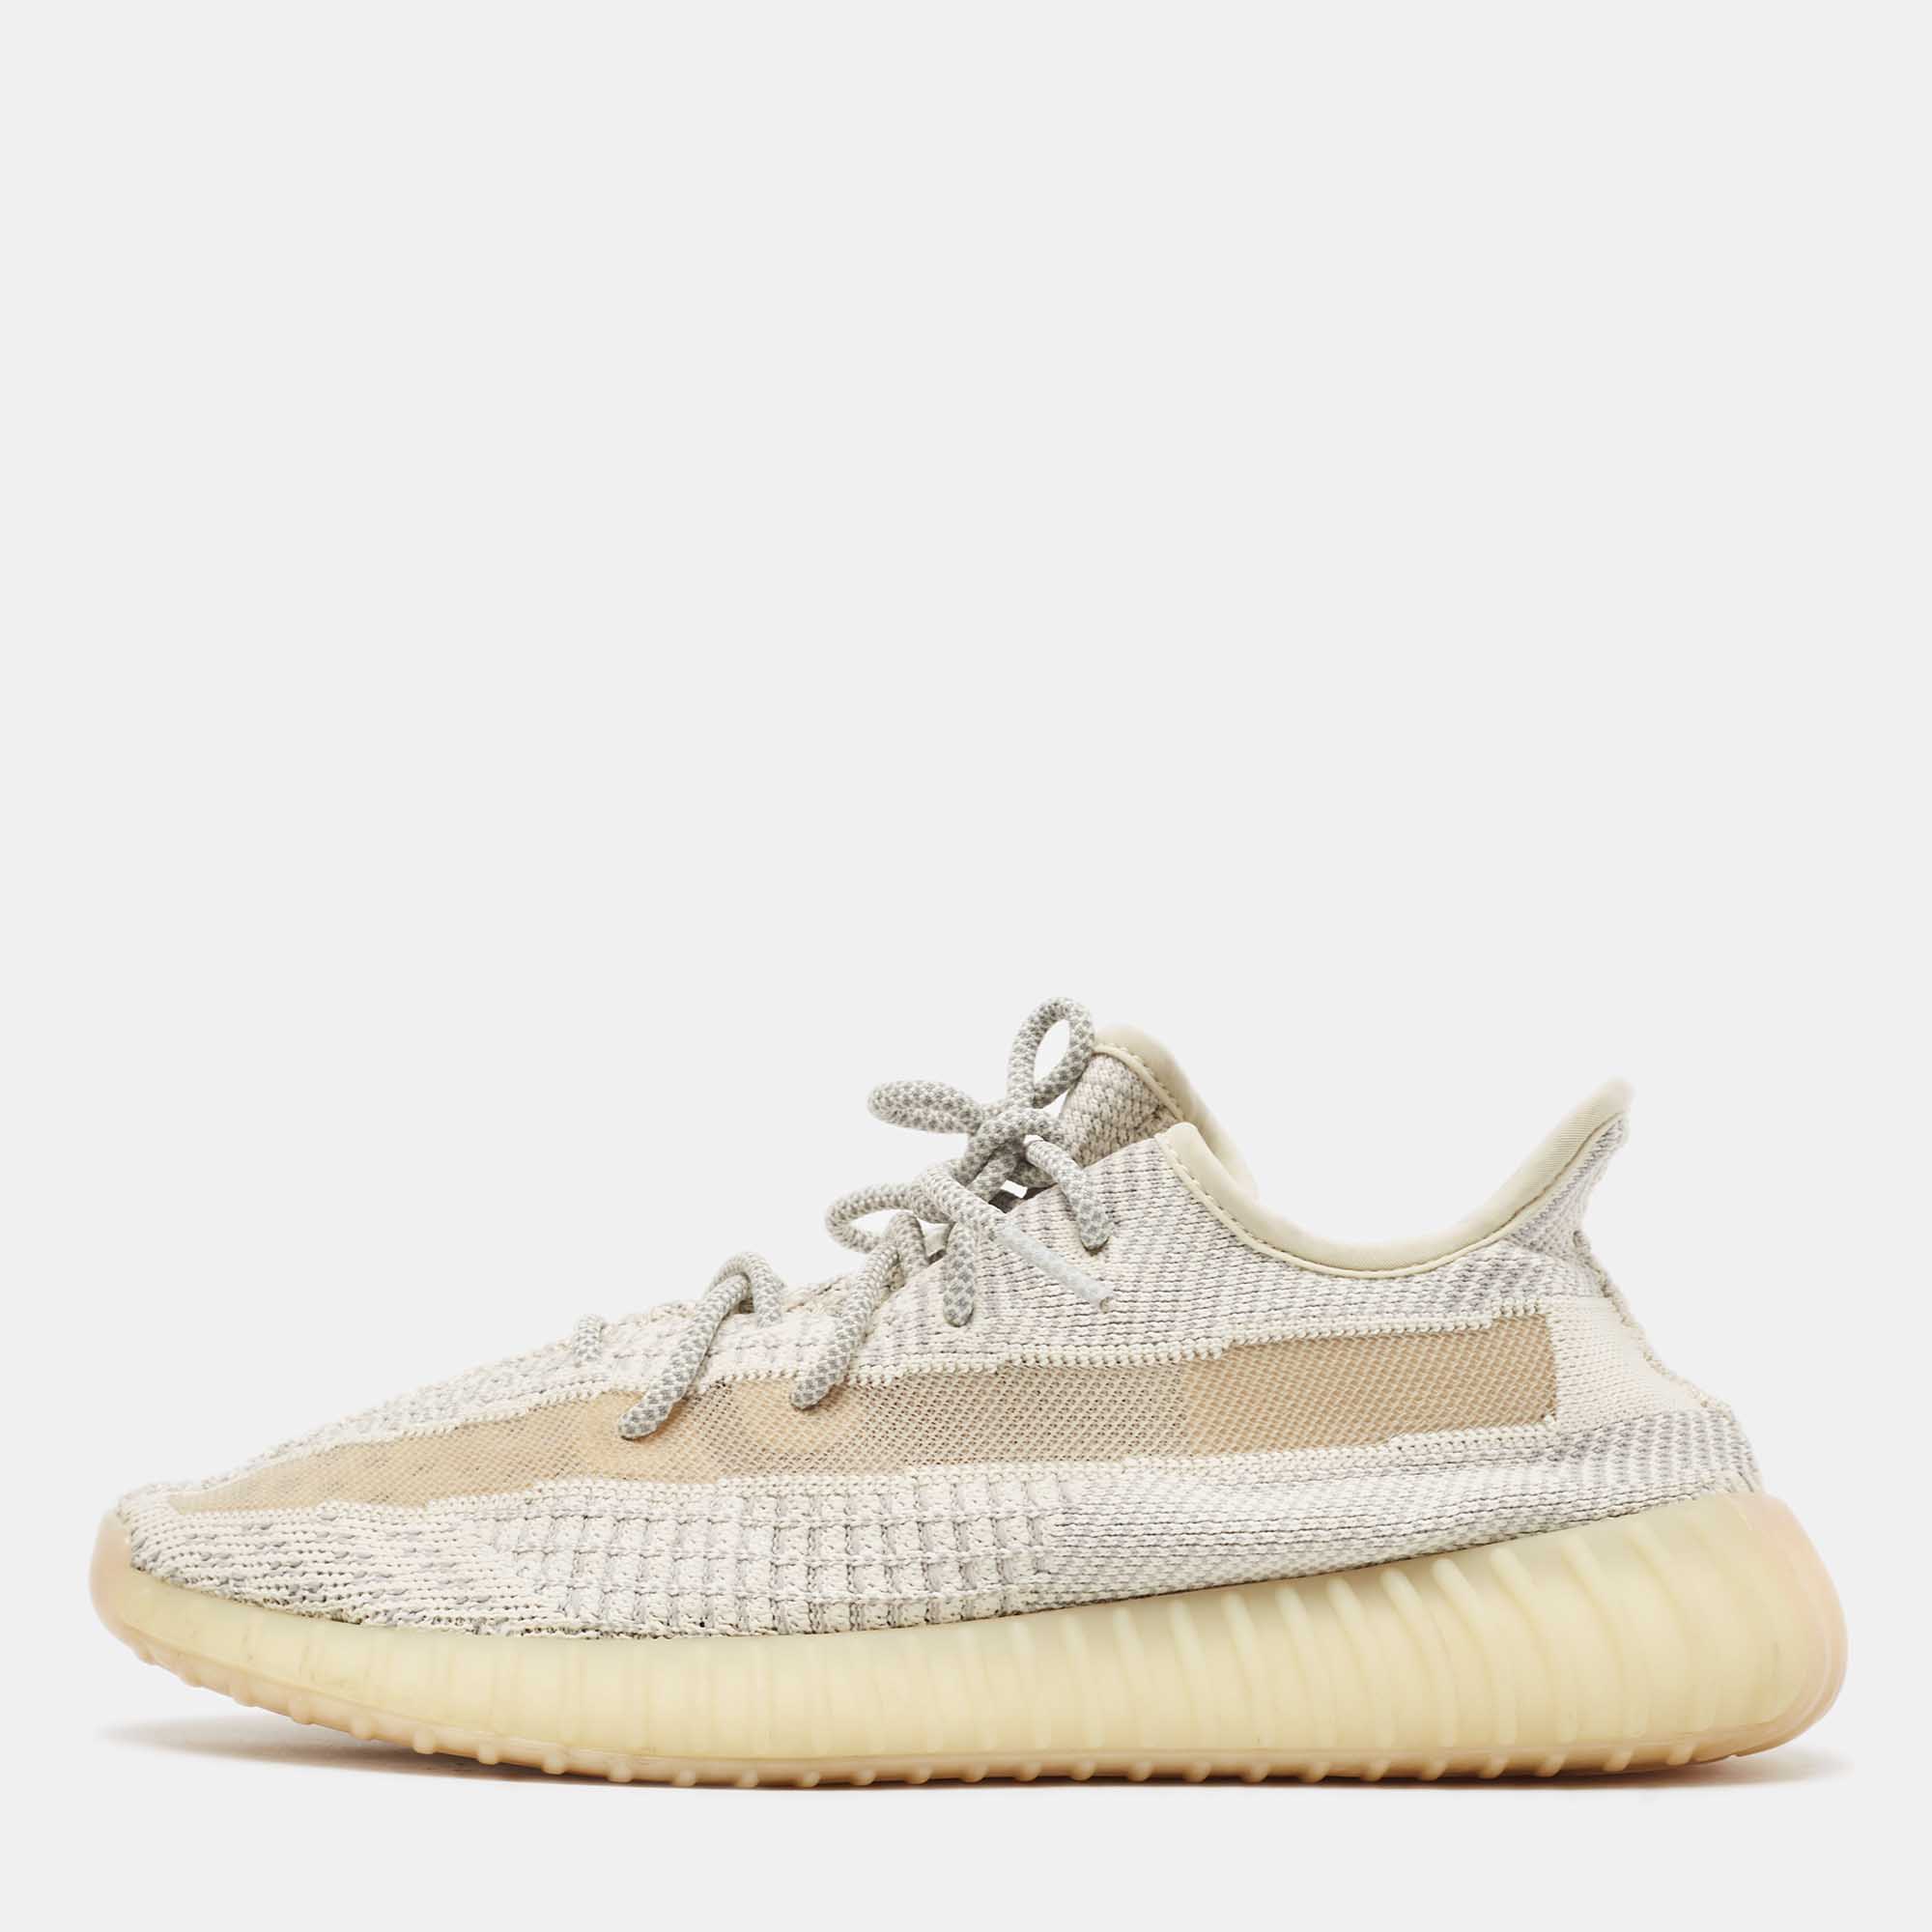 

Yeezy x Adidas White/Green Knit Fabric Boost 350 V2 Cloud White Reflective Sneakers Size  2/3, Grey